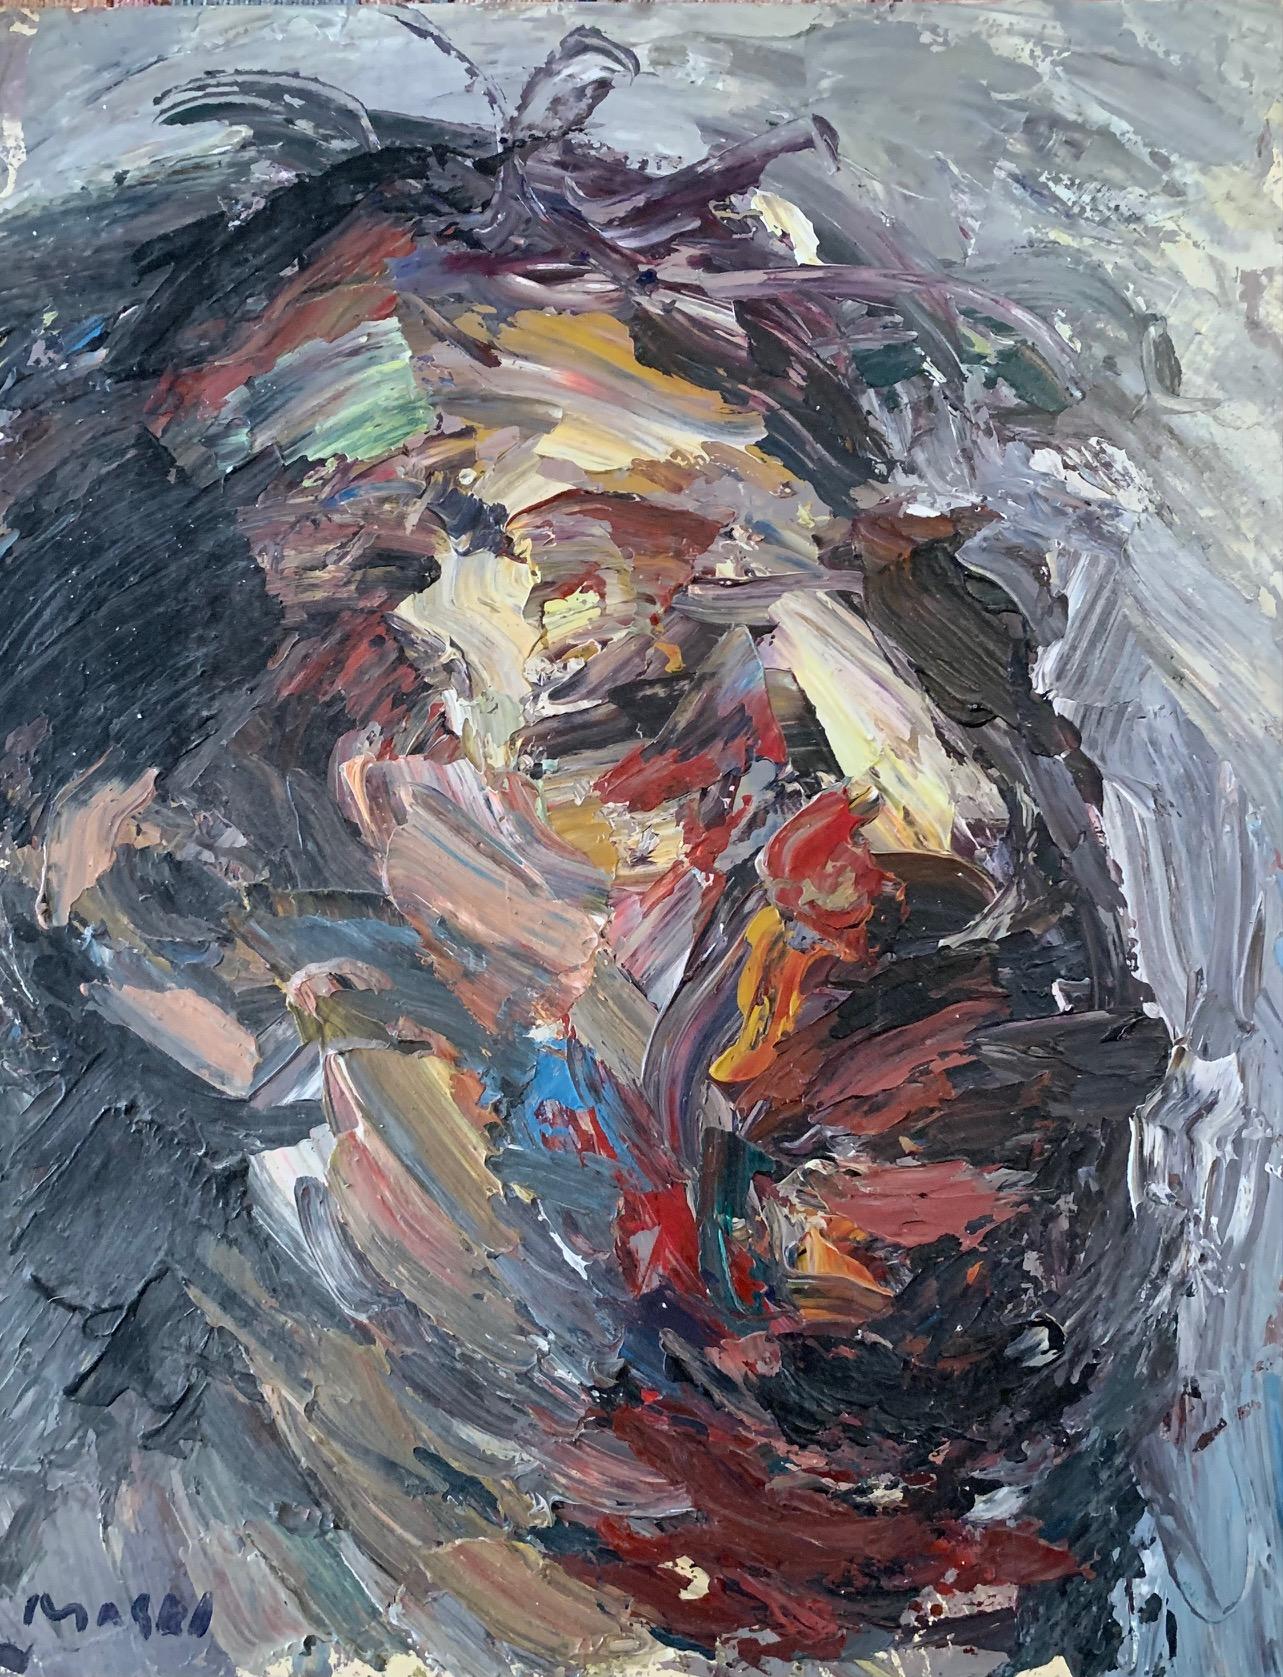 Portrait Painting Masri Hayssam - Untitled' Contemporary Abstract Expressionist Portrait by Masri